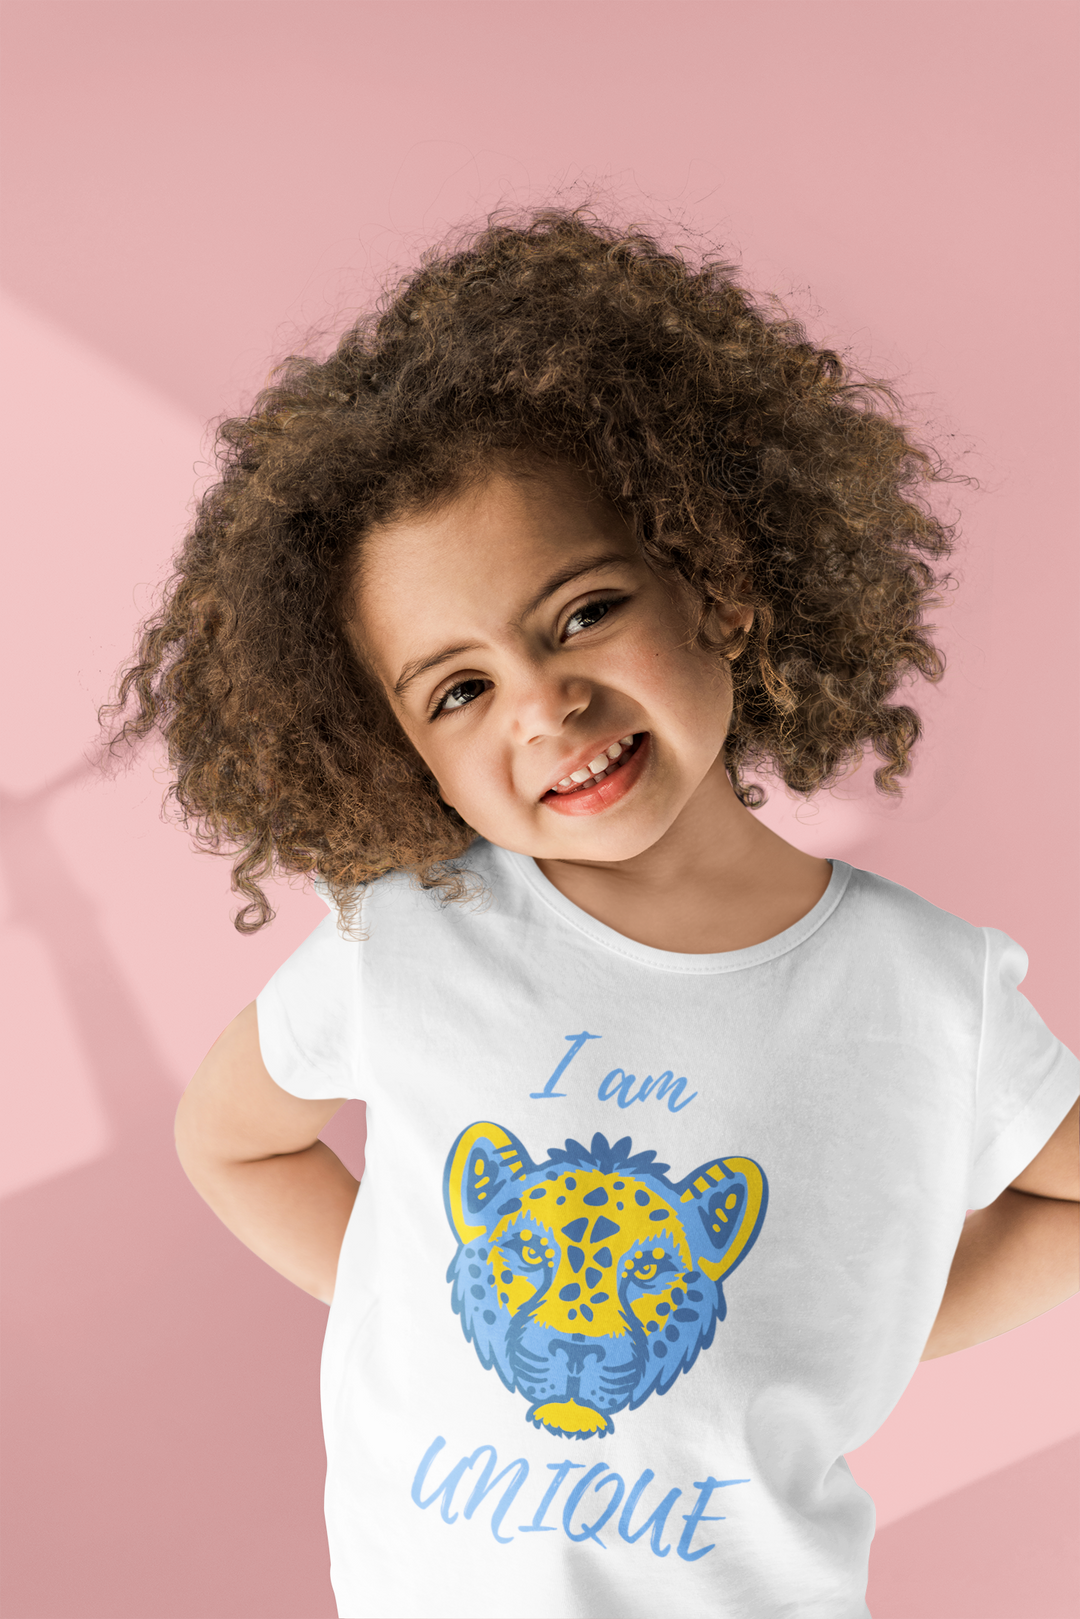 I am unique. Short sleeve t shirt for your toddler and kids. - TeesForToddlersandKids -  t-shirt - positive - i-am-unique-short-sleeve-t-shirt